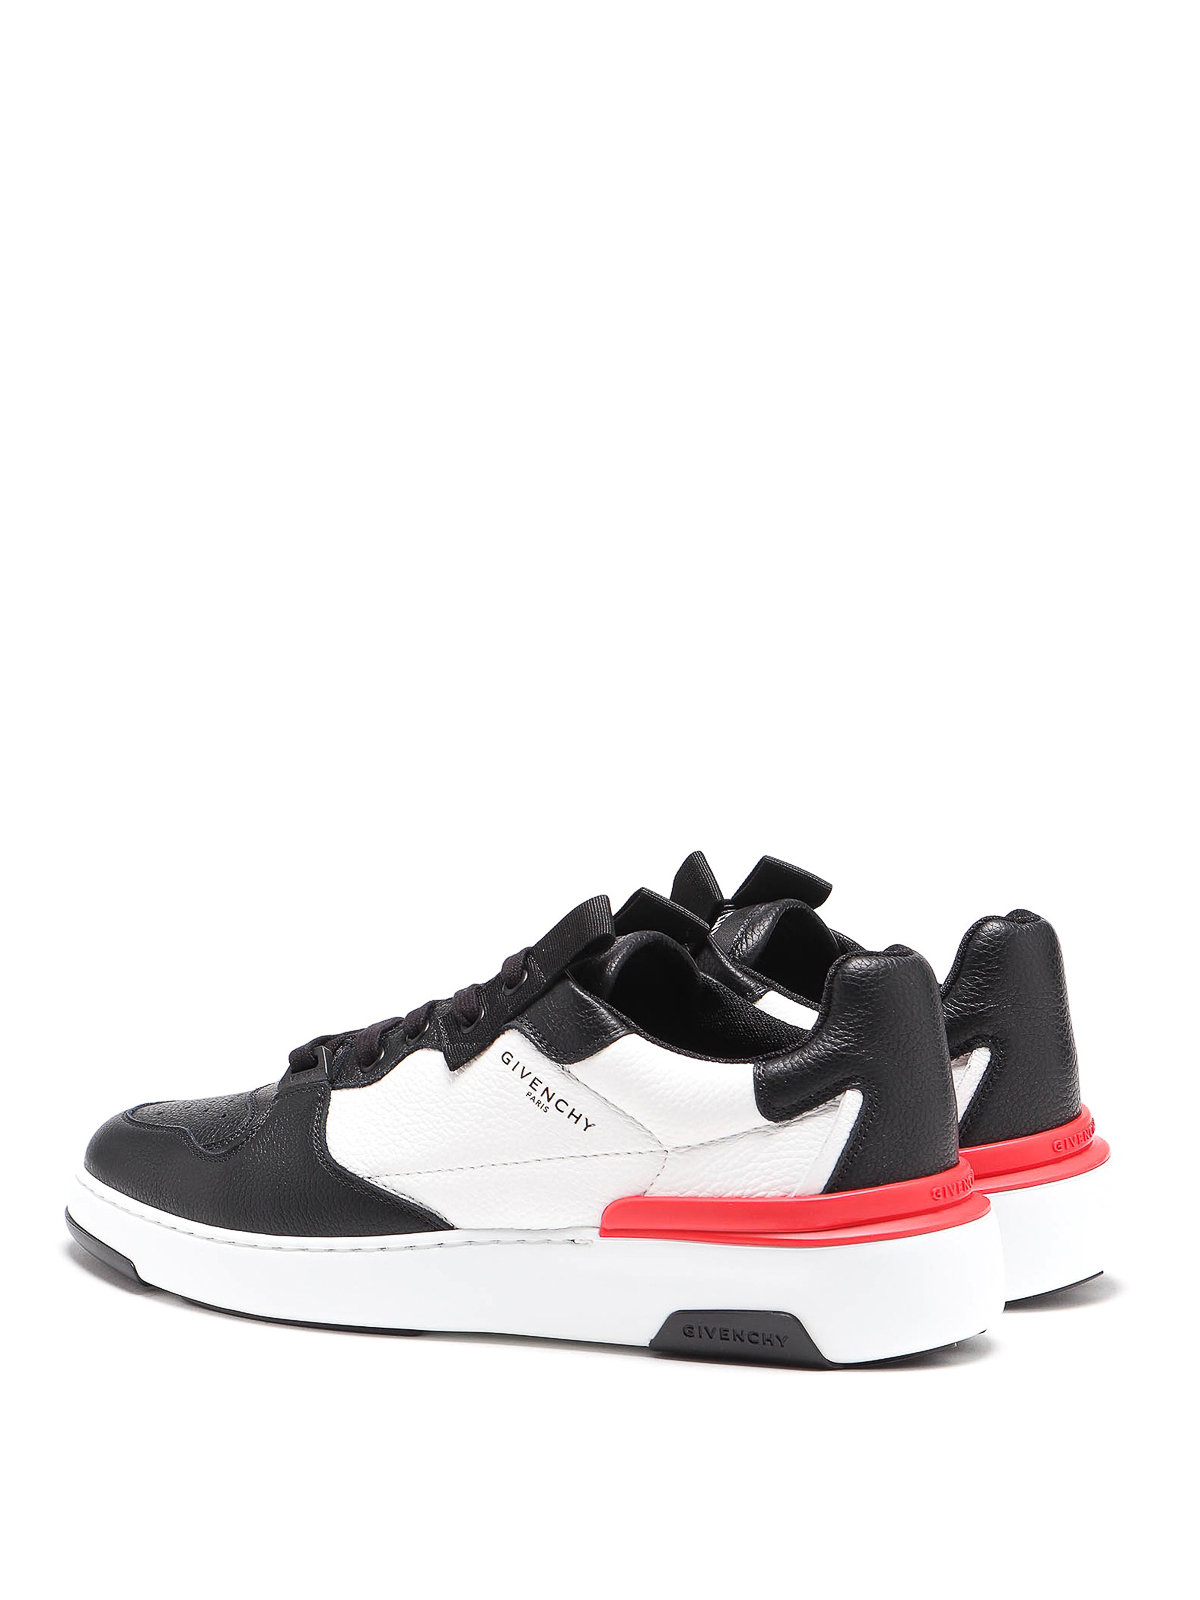 Trainers Givenchy - Wing leather low top sneakers - BH002KH0K6004